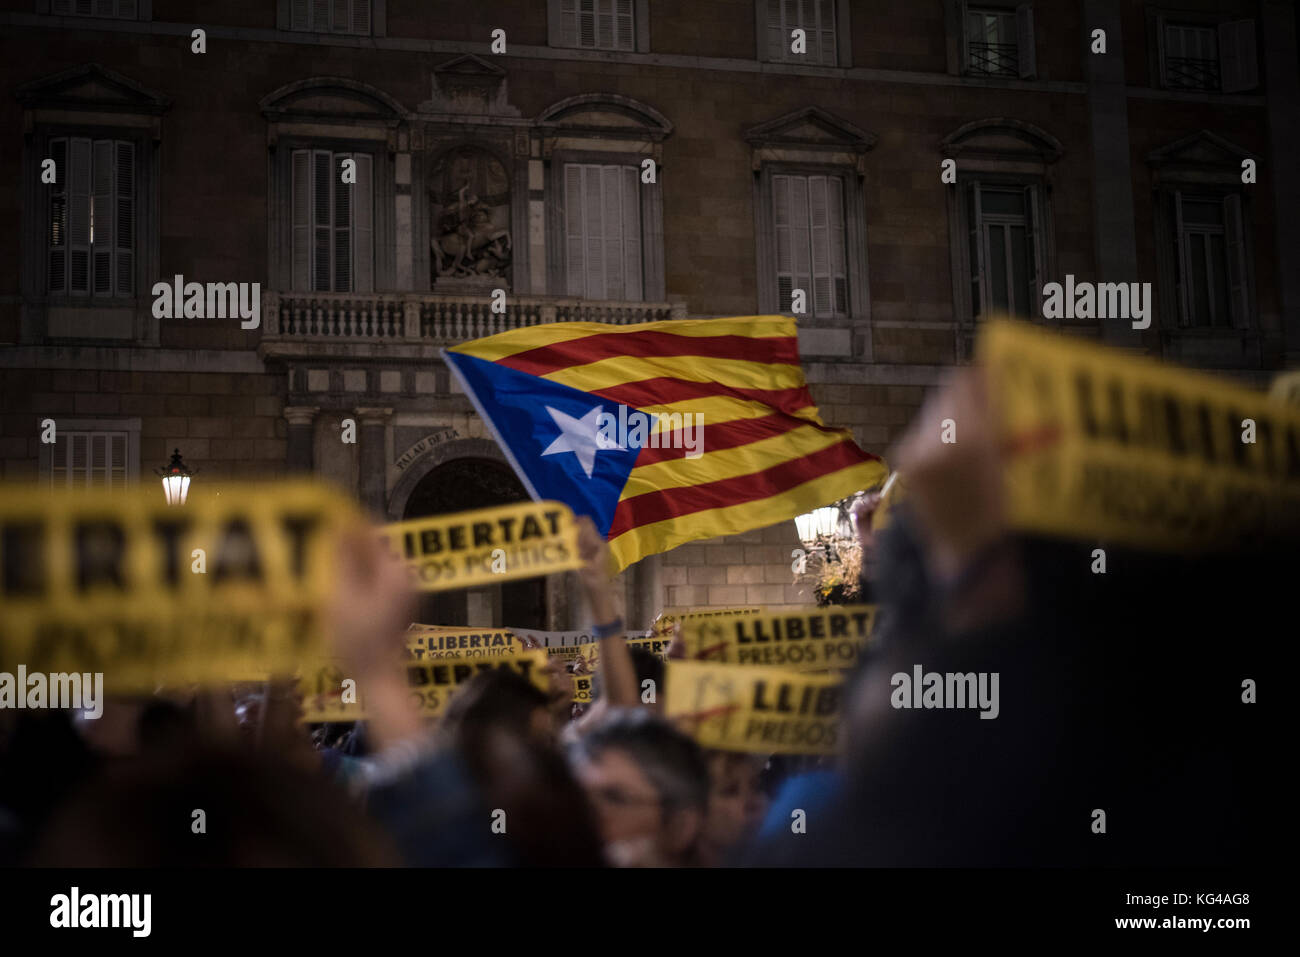 Barcelona, Spain. 3rd Nov, 2017. Thousands of people demonstrate in Plaça Sant Jaume against the imprisonment of Oriol Junqueras, vice president of the Catalan Government, and seven councilors. The National Court has also denied the release of Jordi Sánchez and Jordi Cuixart, civil leaders of the independence movement. Carles Puigdemont, the dismissed president of the Catalan Government, carries out his defense strategy from Brussels, from where he has refused to go to the National Court. Credit: Carles Desfilis / Alamy Live News Stock Photo